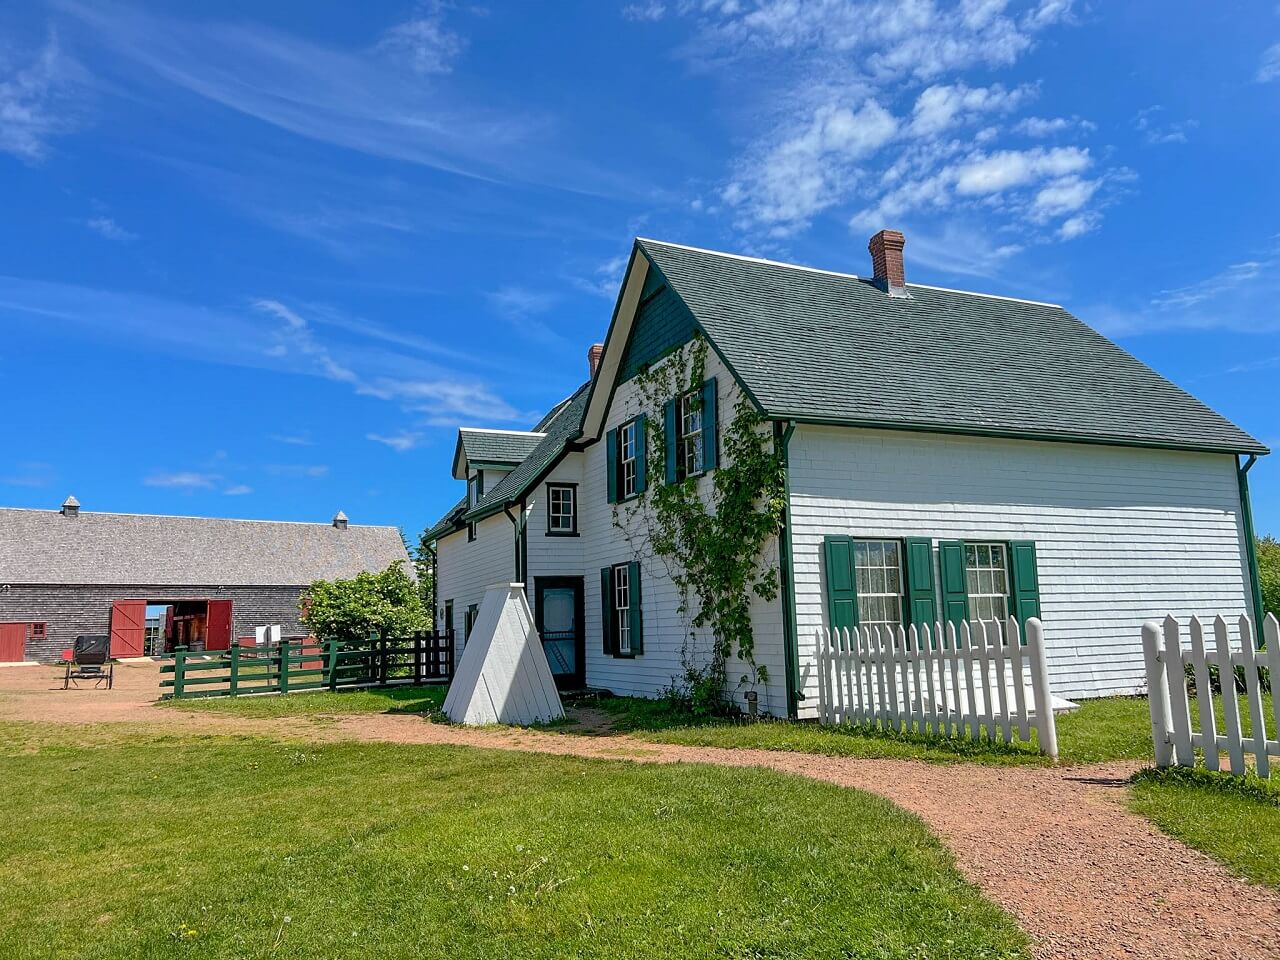 Green Gables House in New Mexico